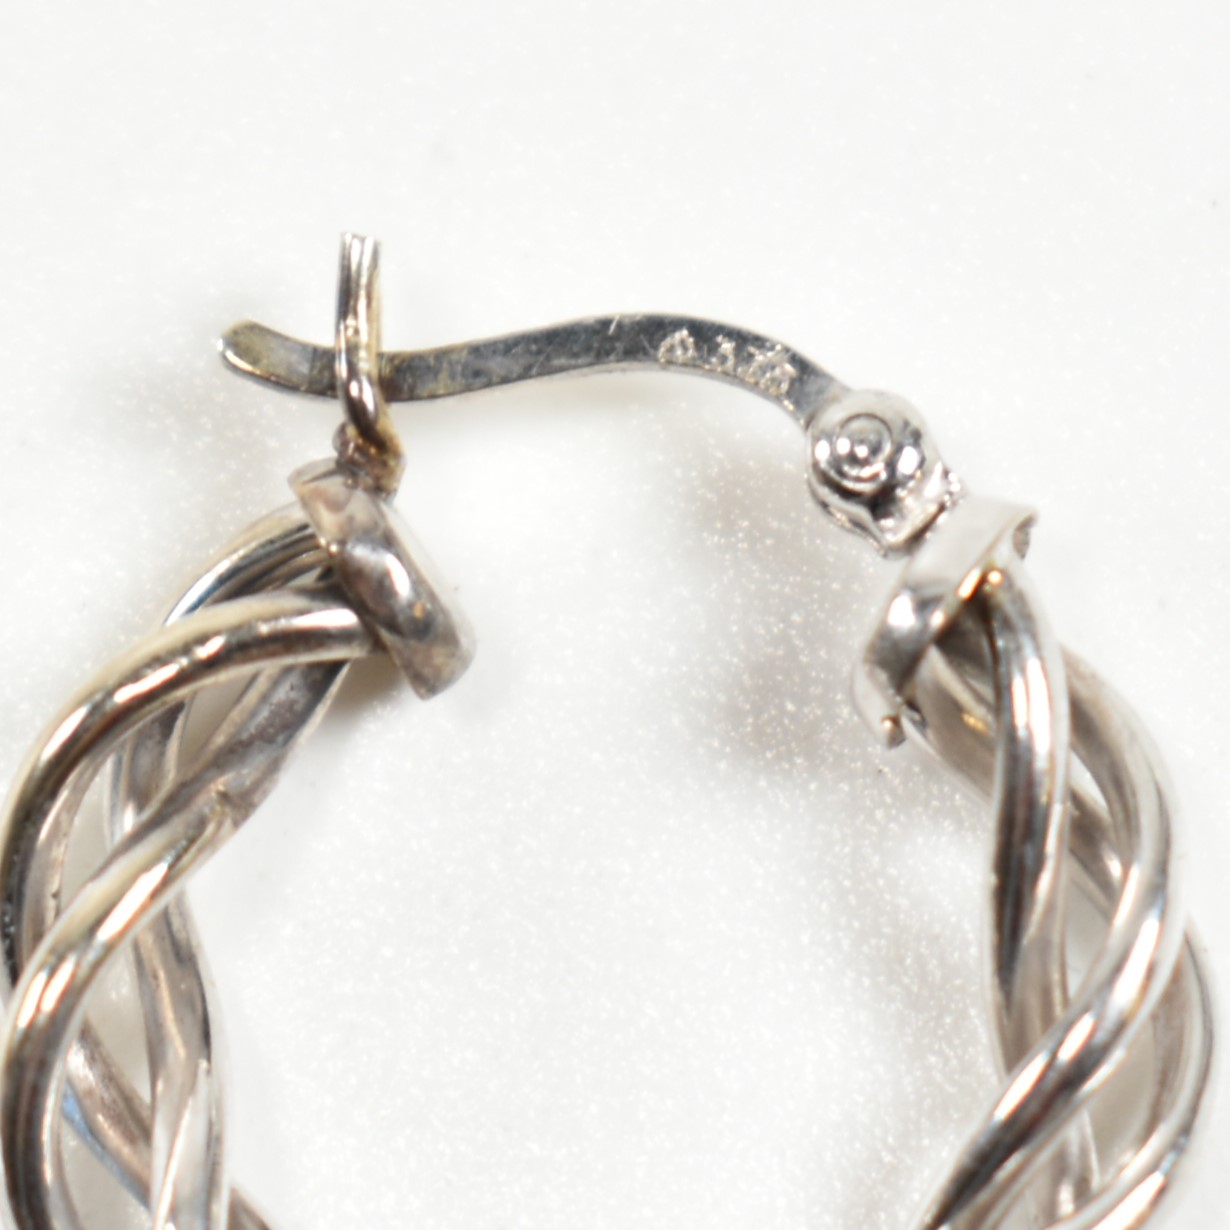 TWO PAIRS OF 9CT WHITE GOLD HOOP EARRINGS - Image 3 of 6